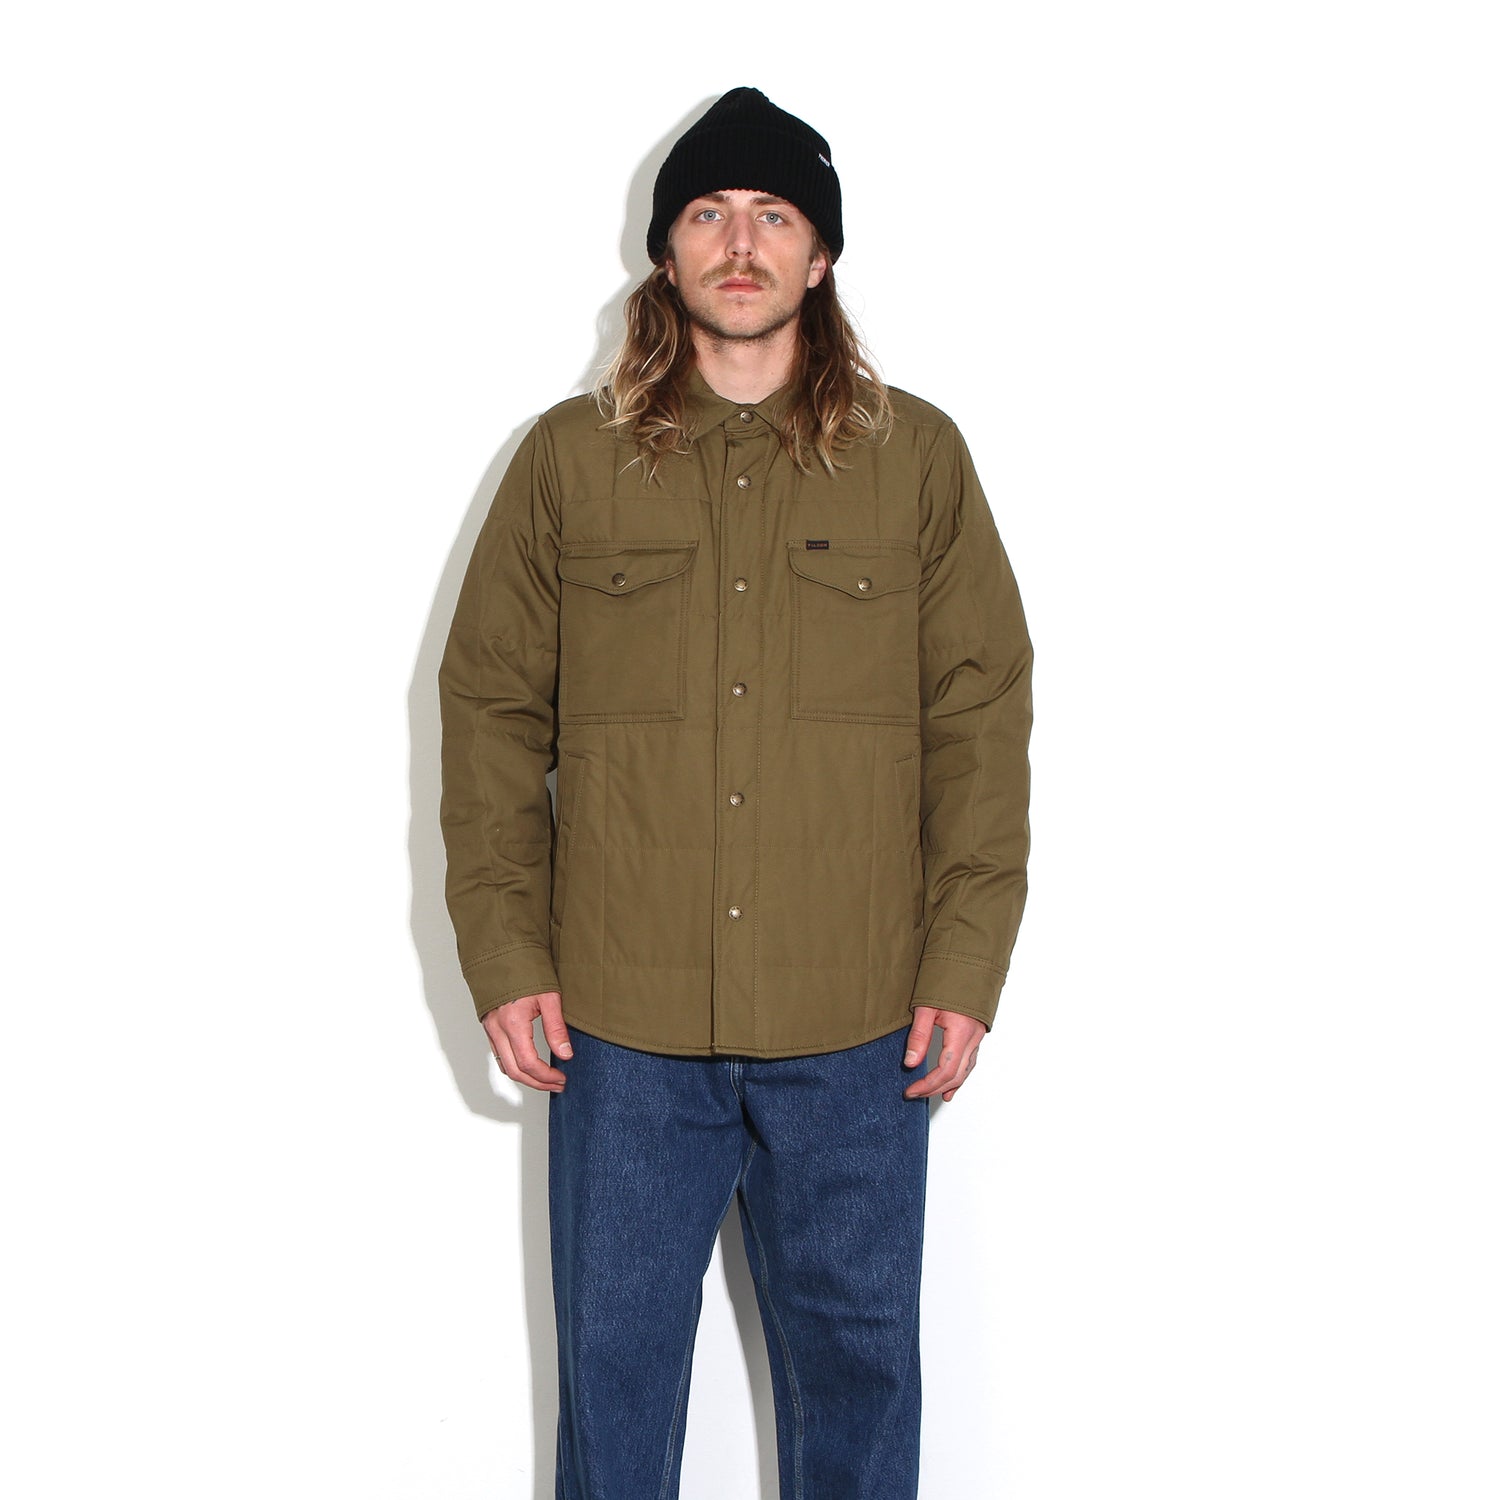 Filson | Cover Cloth Quilted Jac-Shirt Olive Drab